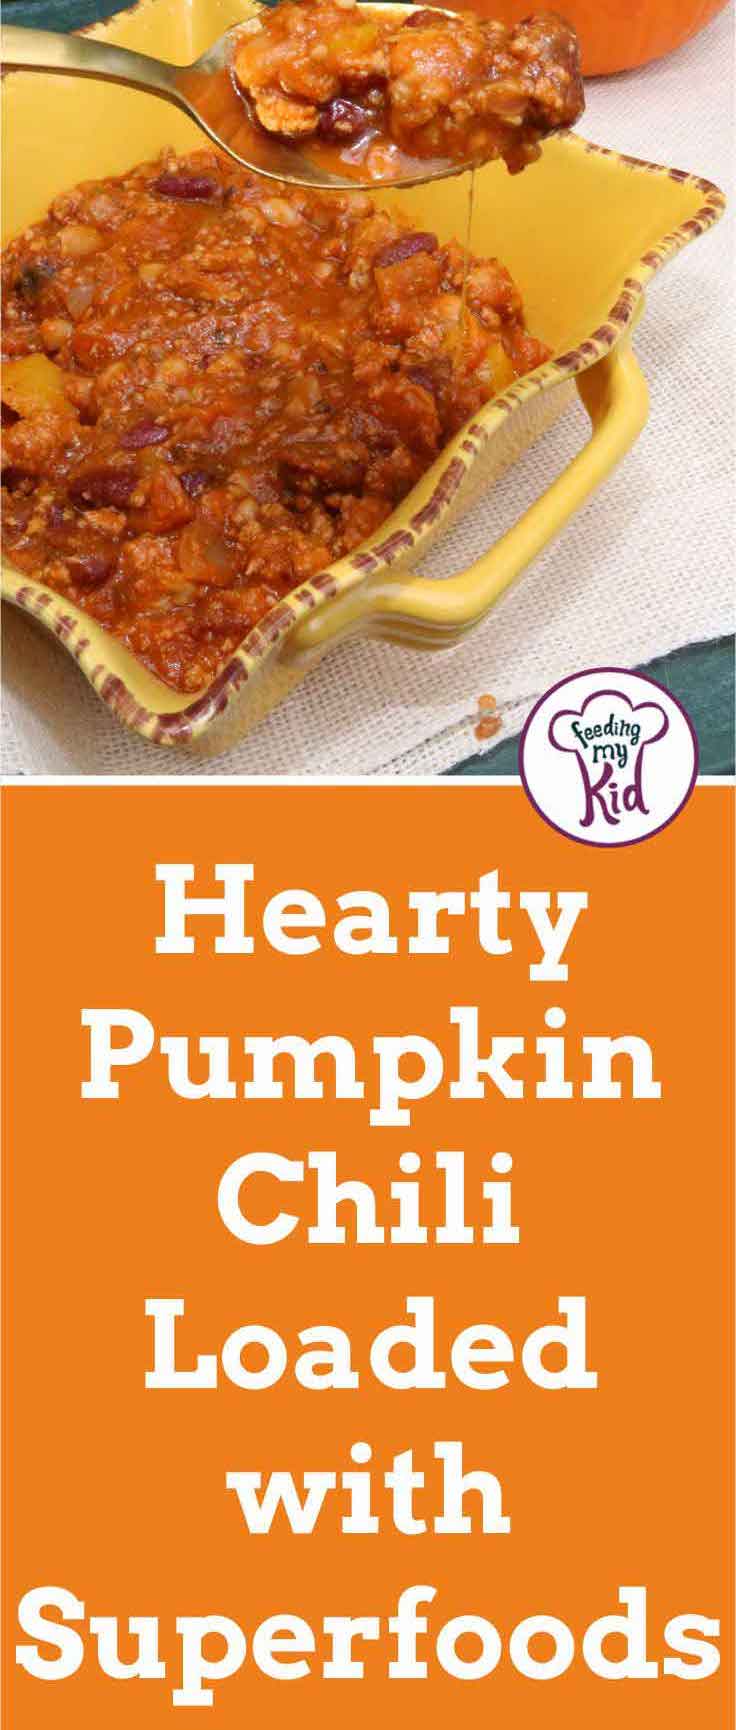 This pumpkin chili is filled with all the flavors of Fall! Using turkey and superfoods, this chili is as healthy as it is delicious. You have to try it!